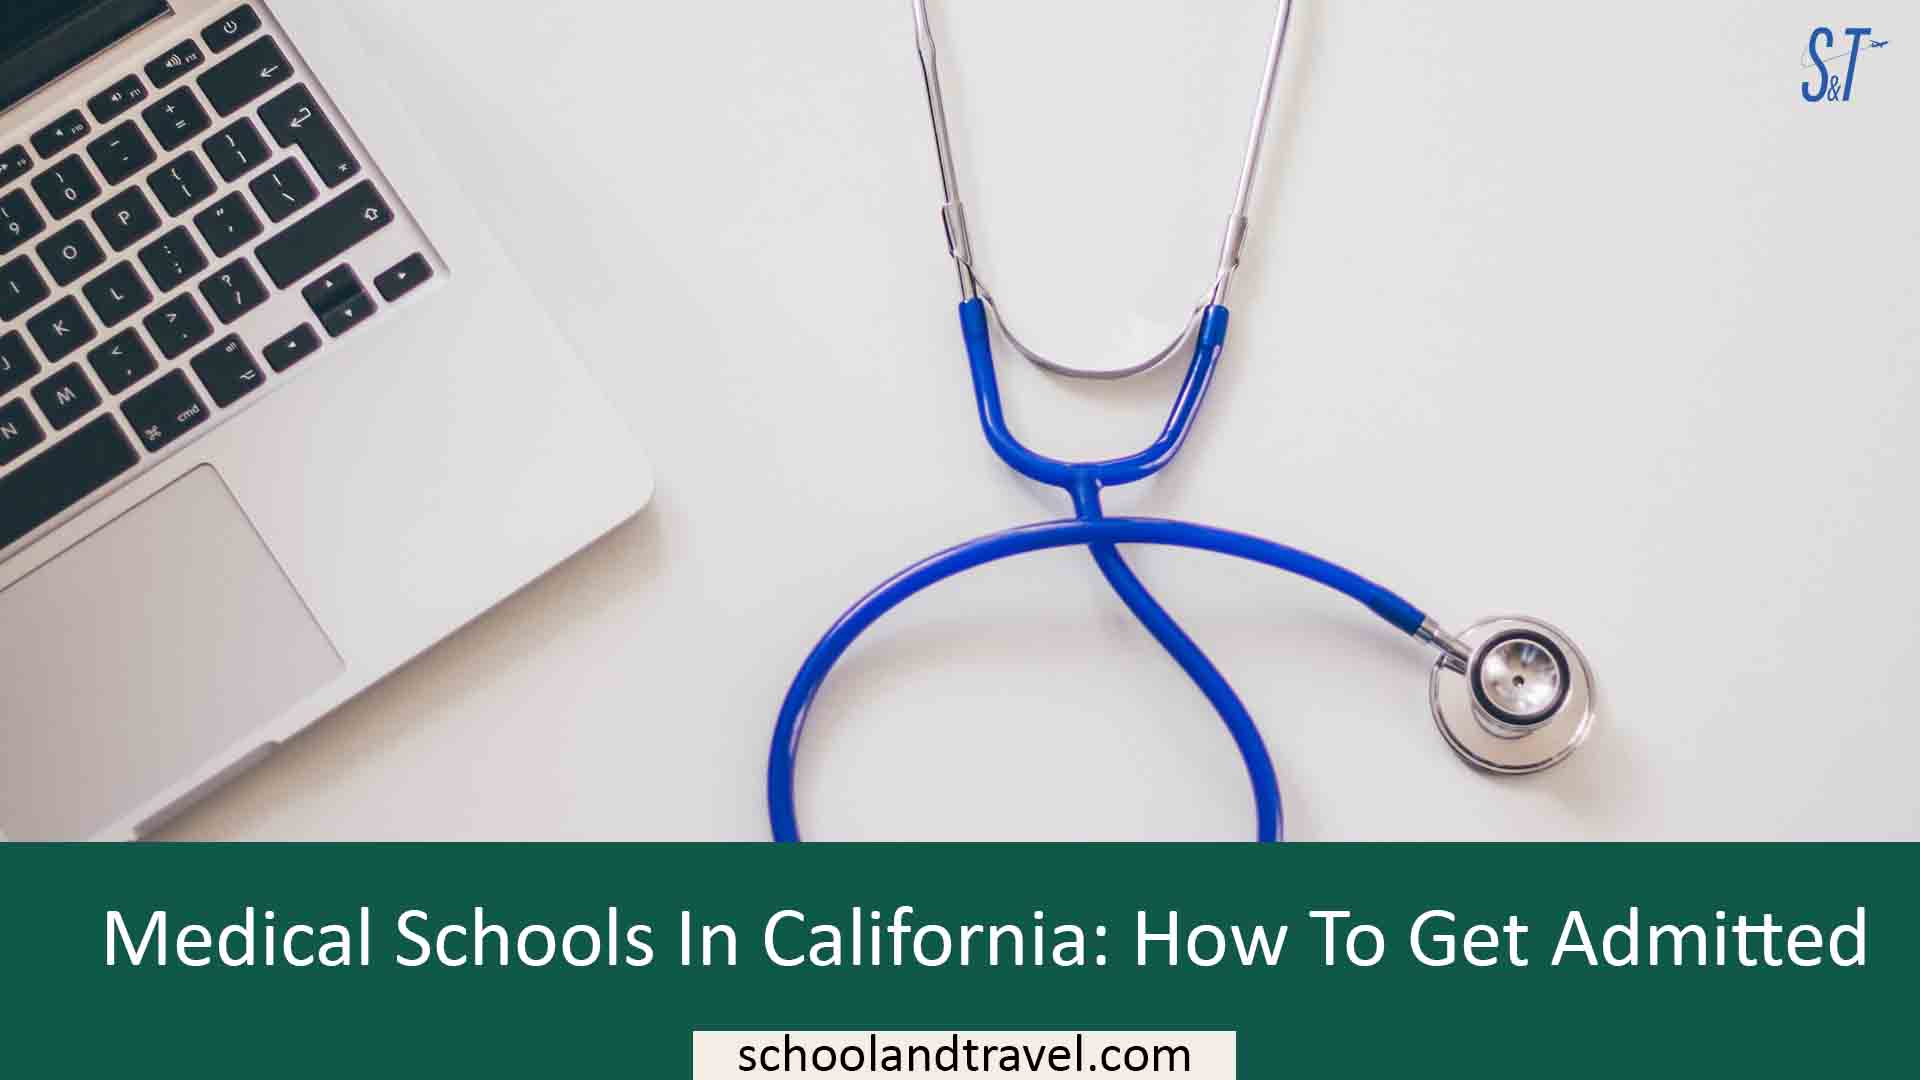 Medical Schools In California: How To Get Admitted